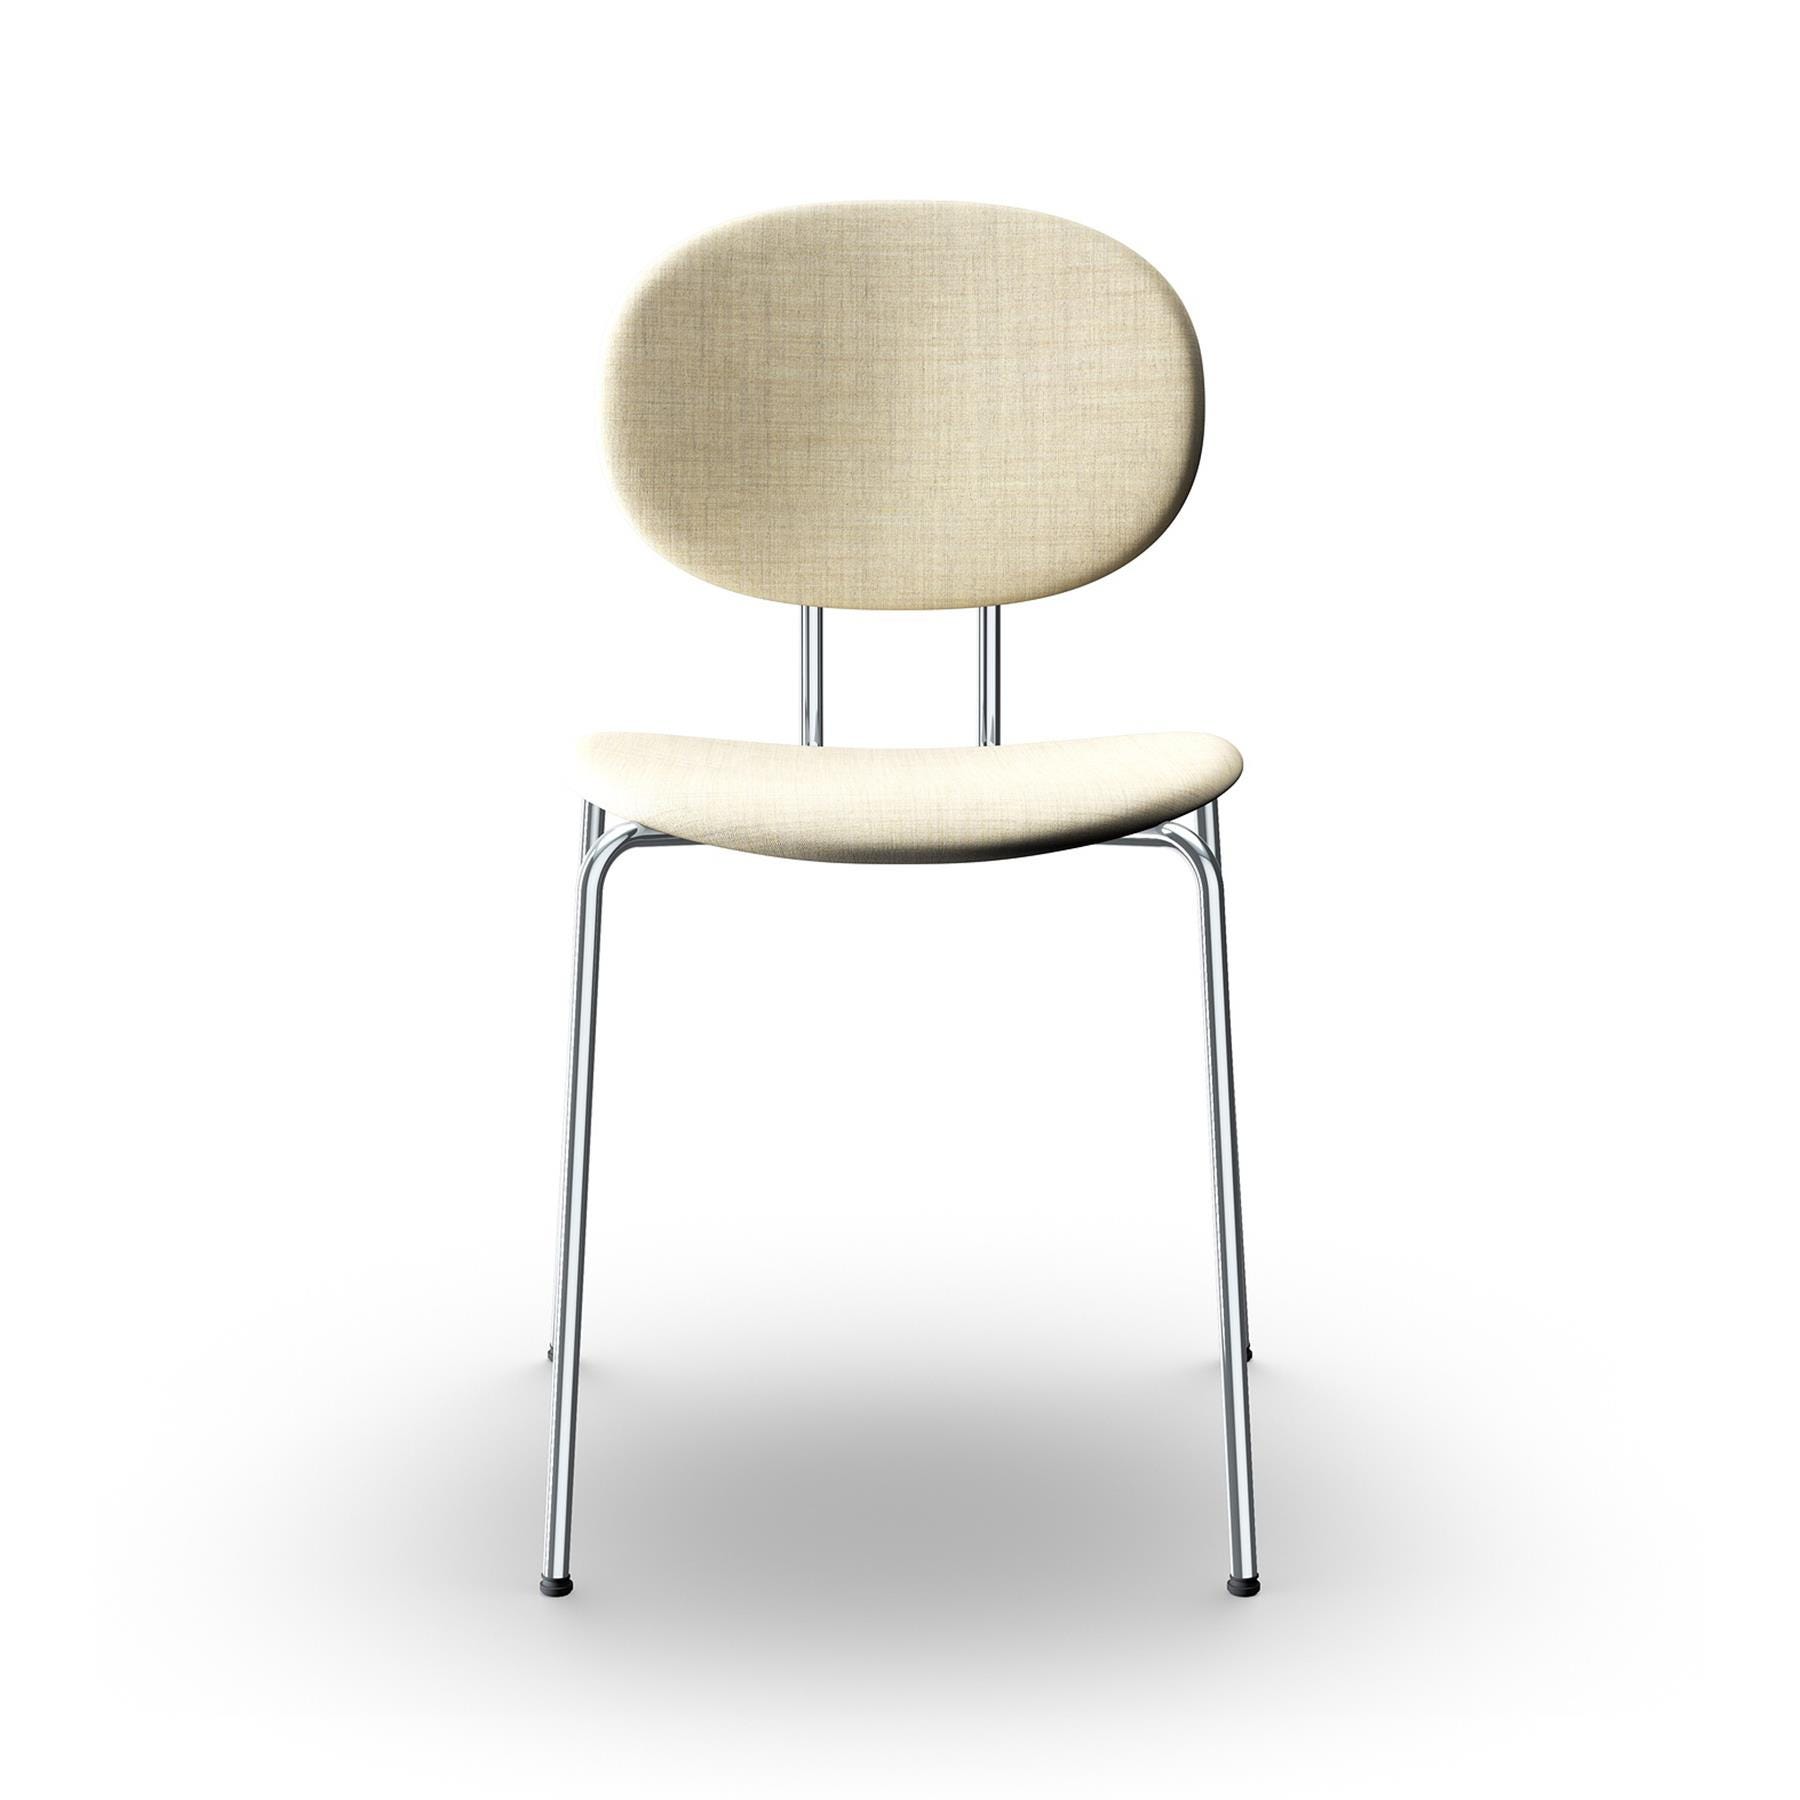 Sibast Piet Hein Dining Chair Fully Upholstered Chrome Remix 223 Cream Designer Furniture From Holloways Of Ludlow